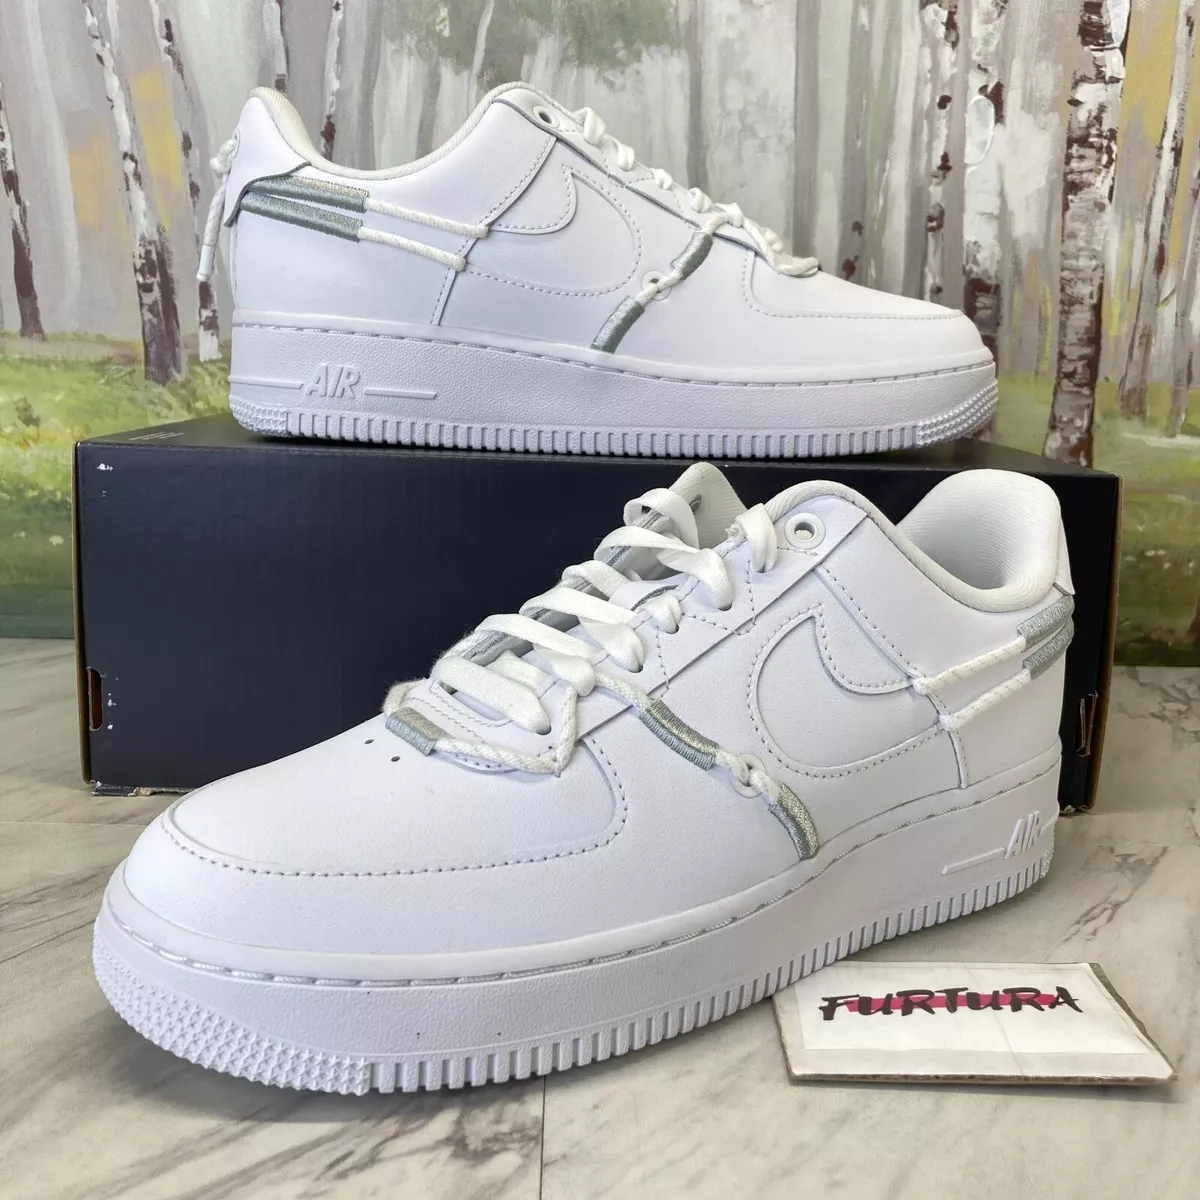 Nike Air Force 1 &#039;07 LX Silver Women Size 8 Shoes #19C |